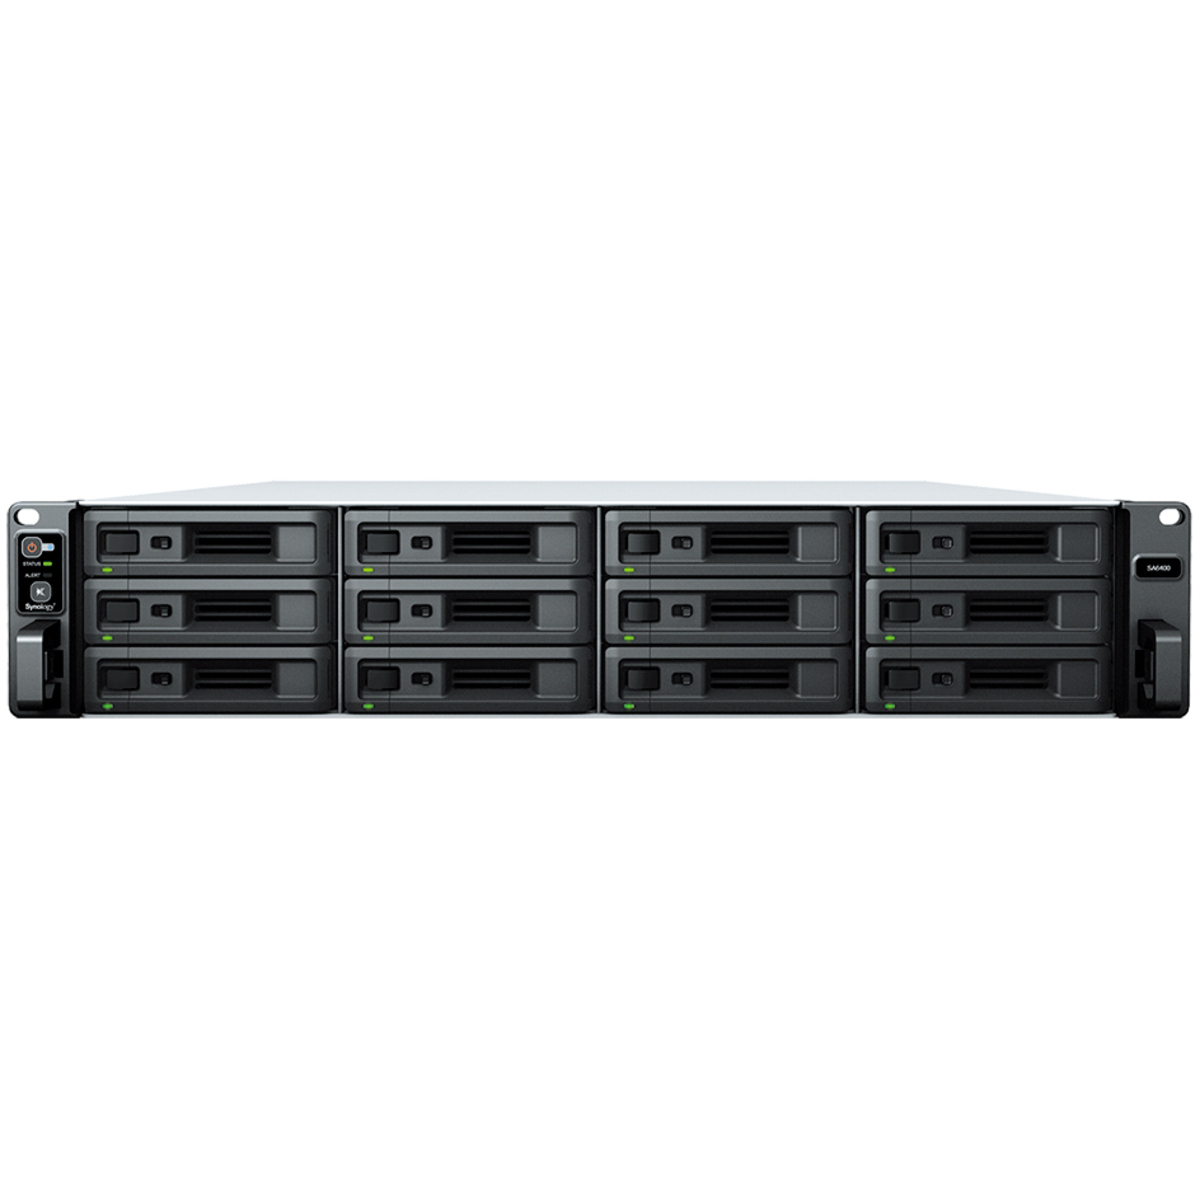 Synology RackStation SA6400 72tb 12-Bay RackMount Large Business / Enterprise NAS - Network Attached Storage Device 9x8tb Seagate BarraCuda ST8000DM004 3.5 5400rpm SATA 6Gb/s HDD CONSUMER Class Drives Installed - Burn-In Tested RackStation SA6400